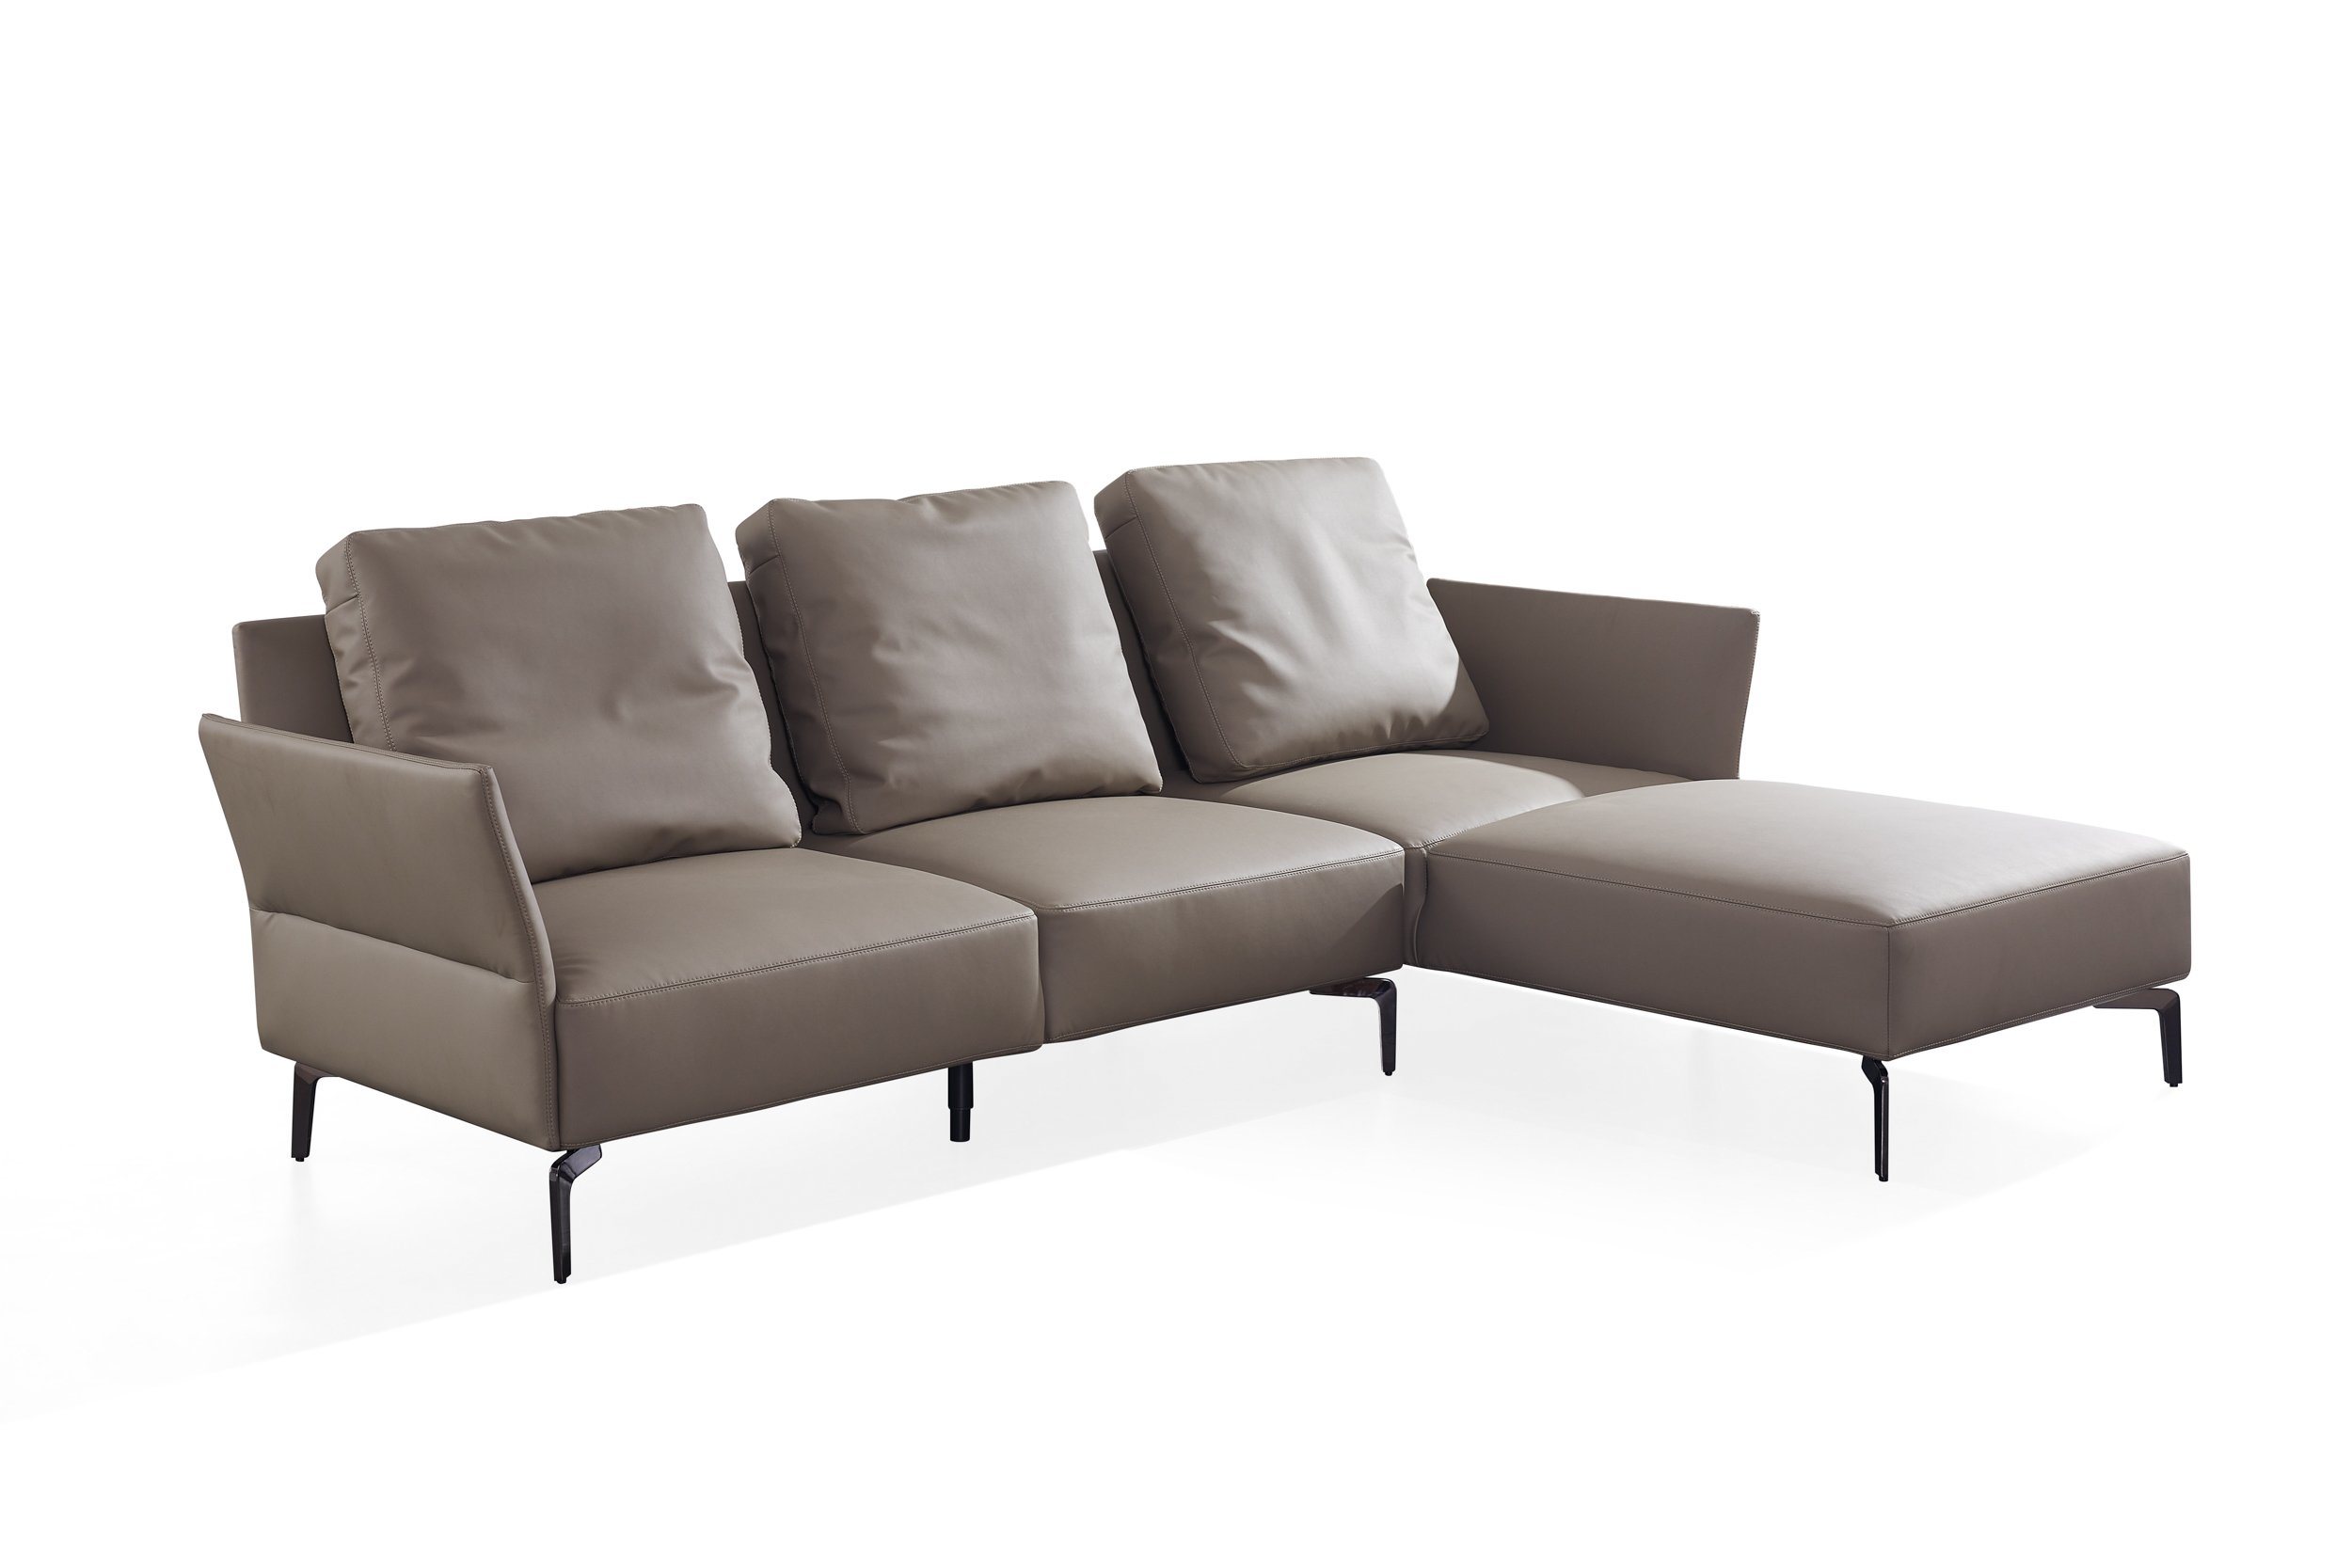 Home Living Room Laf Two Seater Chaiselounge Nano Leather Sofa Set